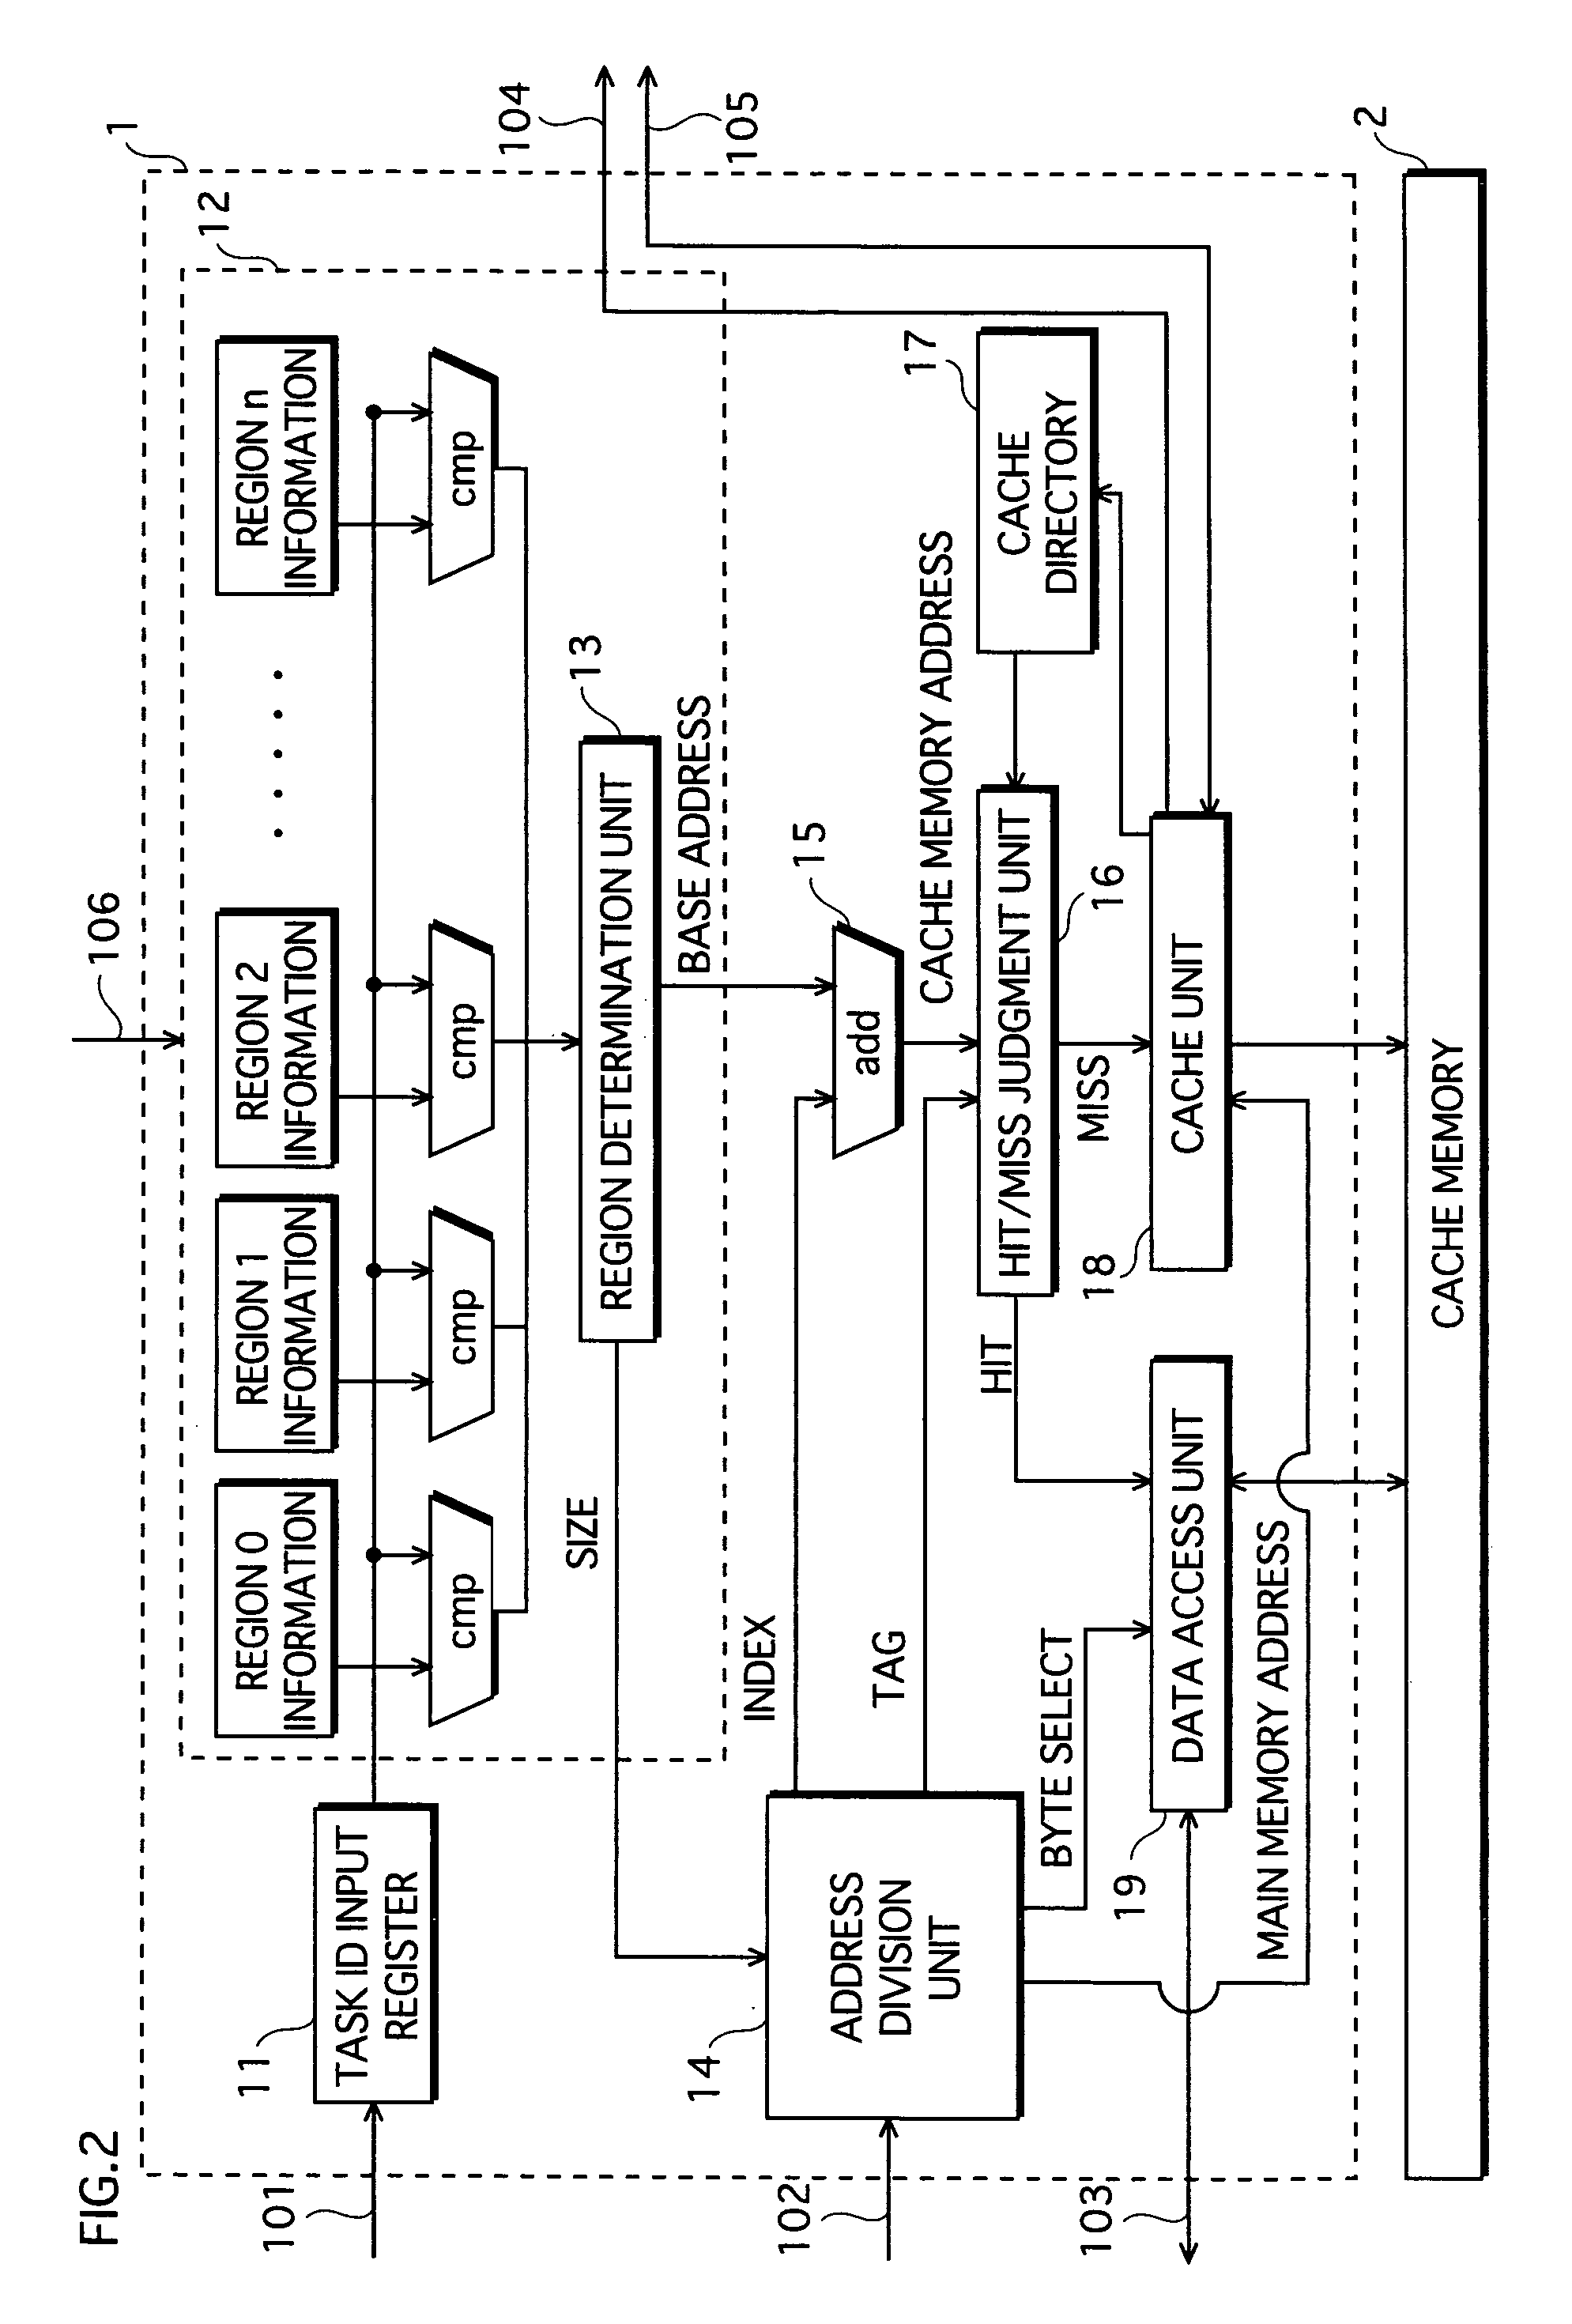 Cache controller, cache control method, and computer system